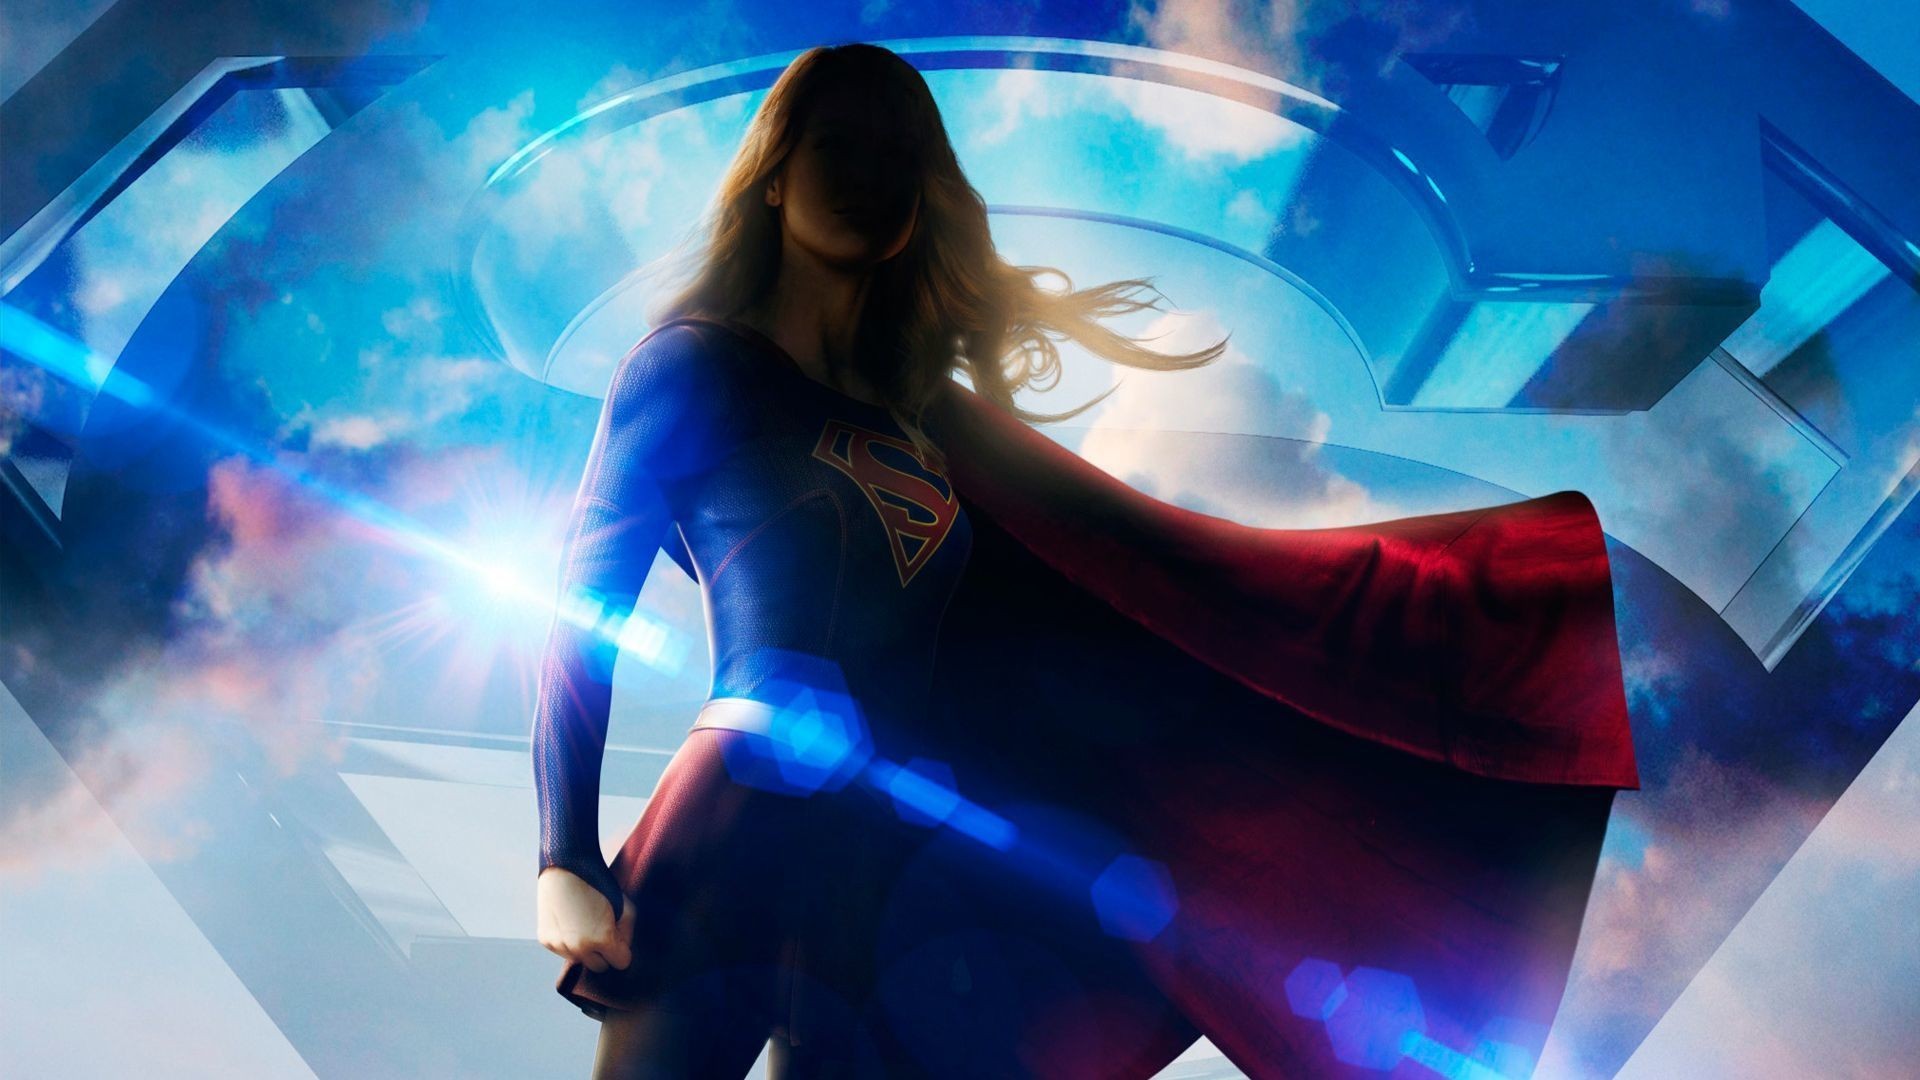 Wallpaper Supergirl Desktop With high-resolution 1920X1080 pixel. You can use this wallpaper for your Windows and Mac OS computers as well as your Android and iPhone smartphones